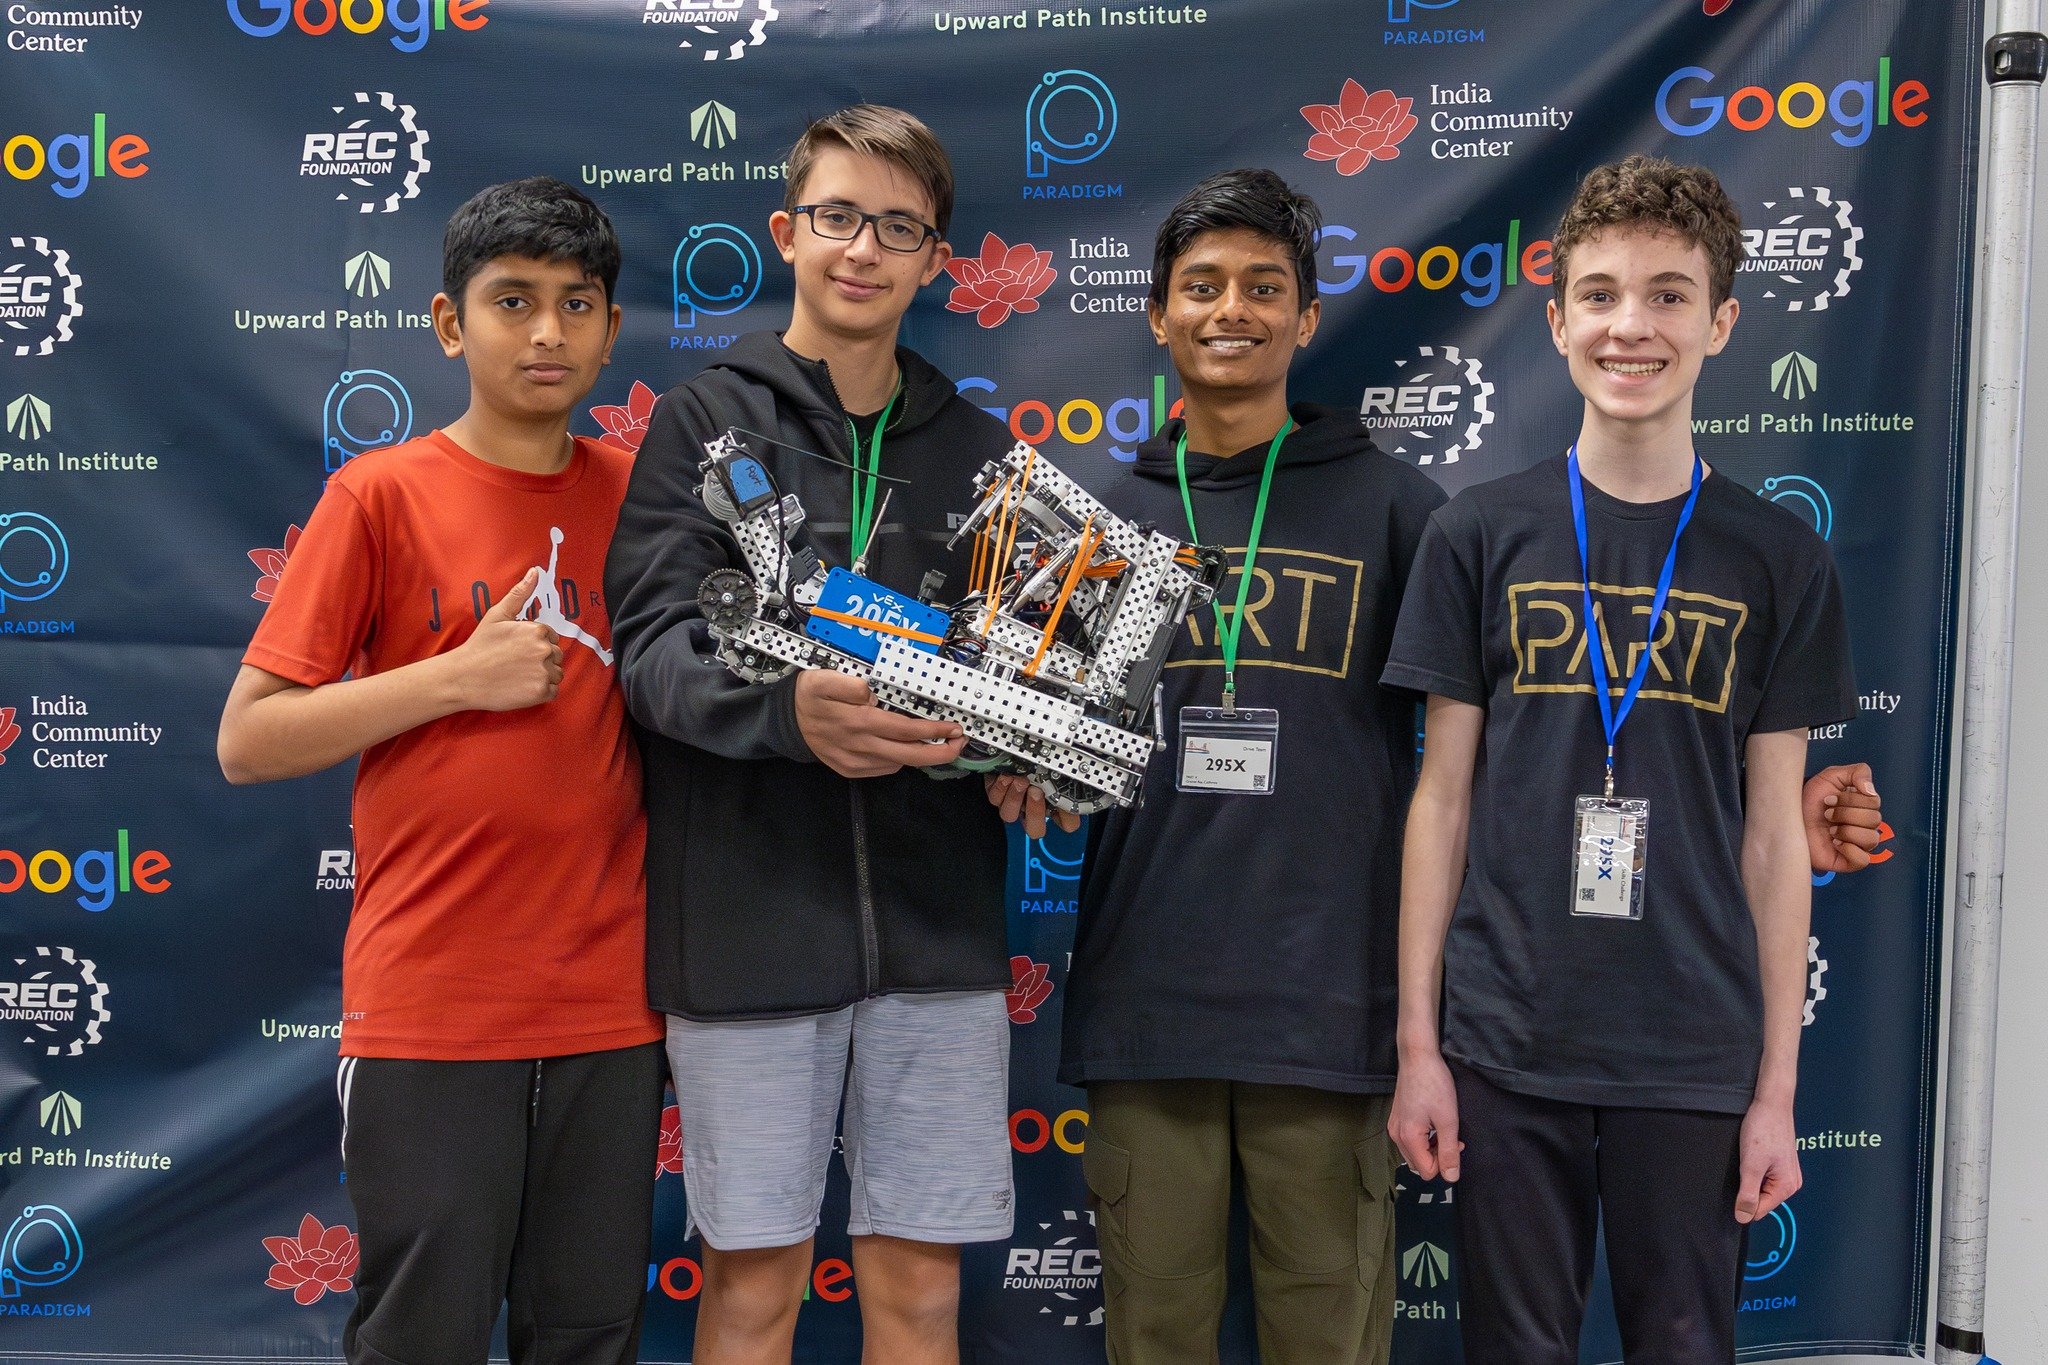  PART 295X: Ranked in the top ten and advanced to quarterfinals at Milpitas middle school championship 